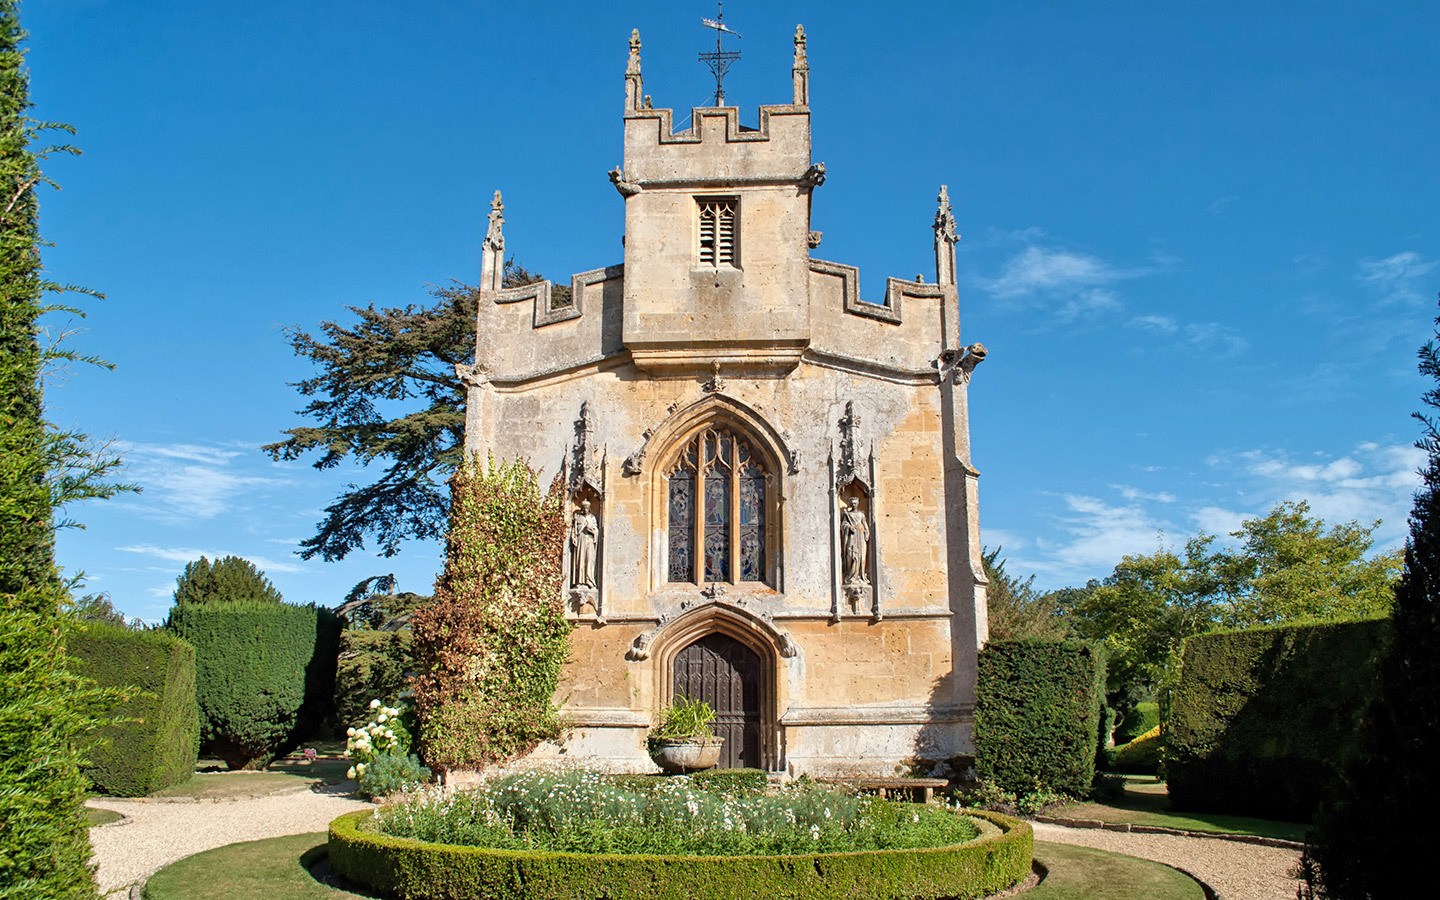 St Mary’s Church at Sudeley Castle in the Cotswolds